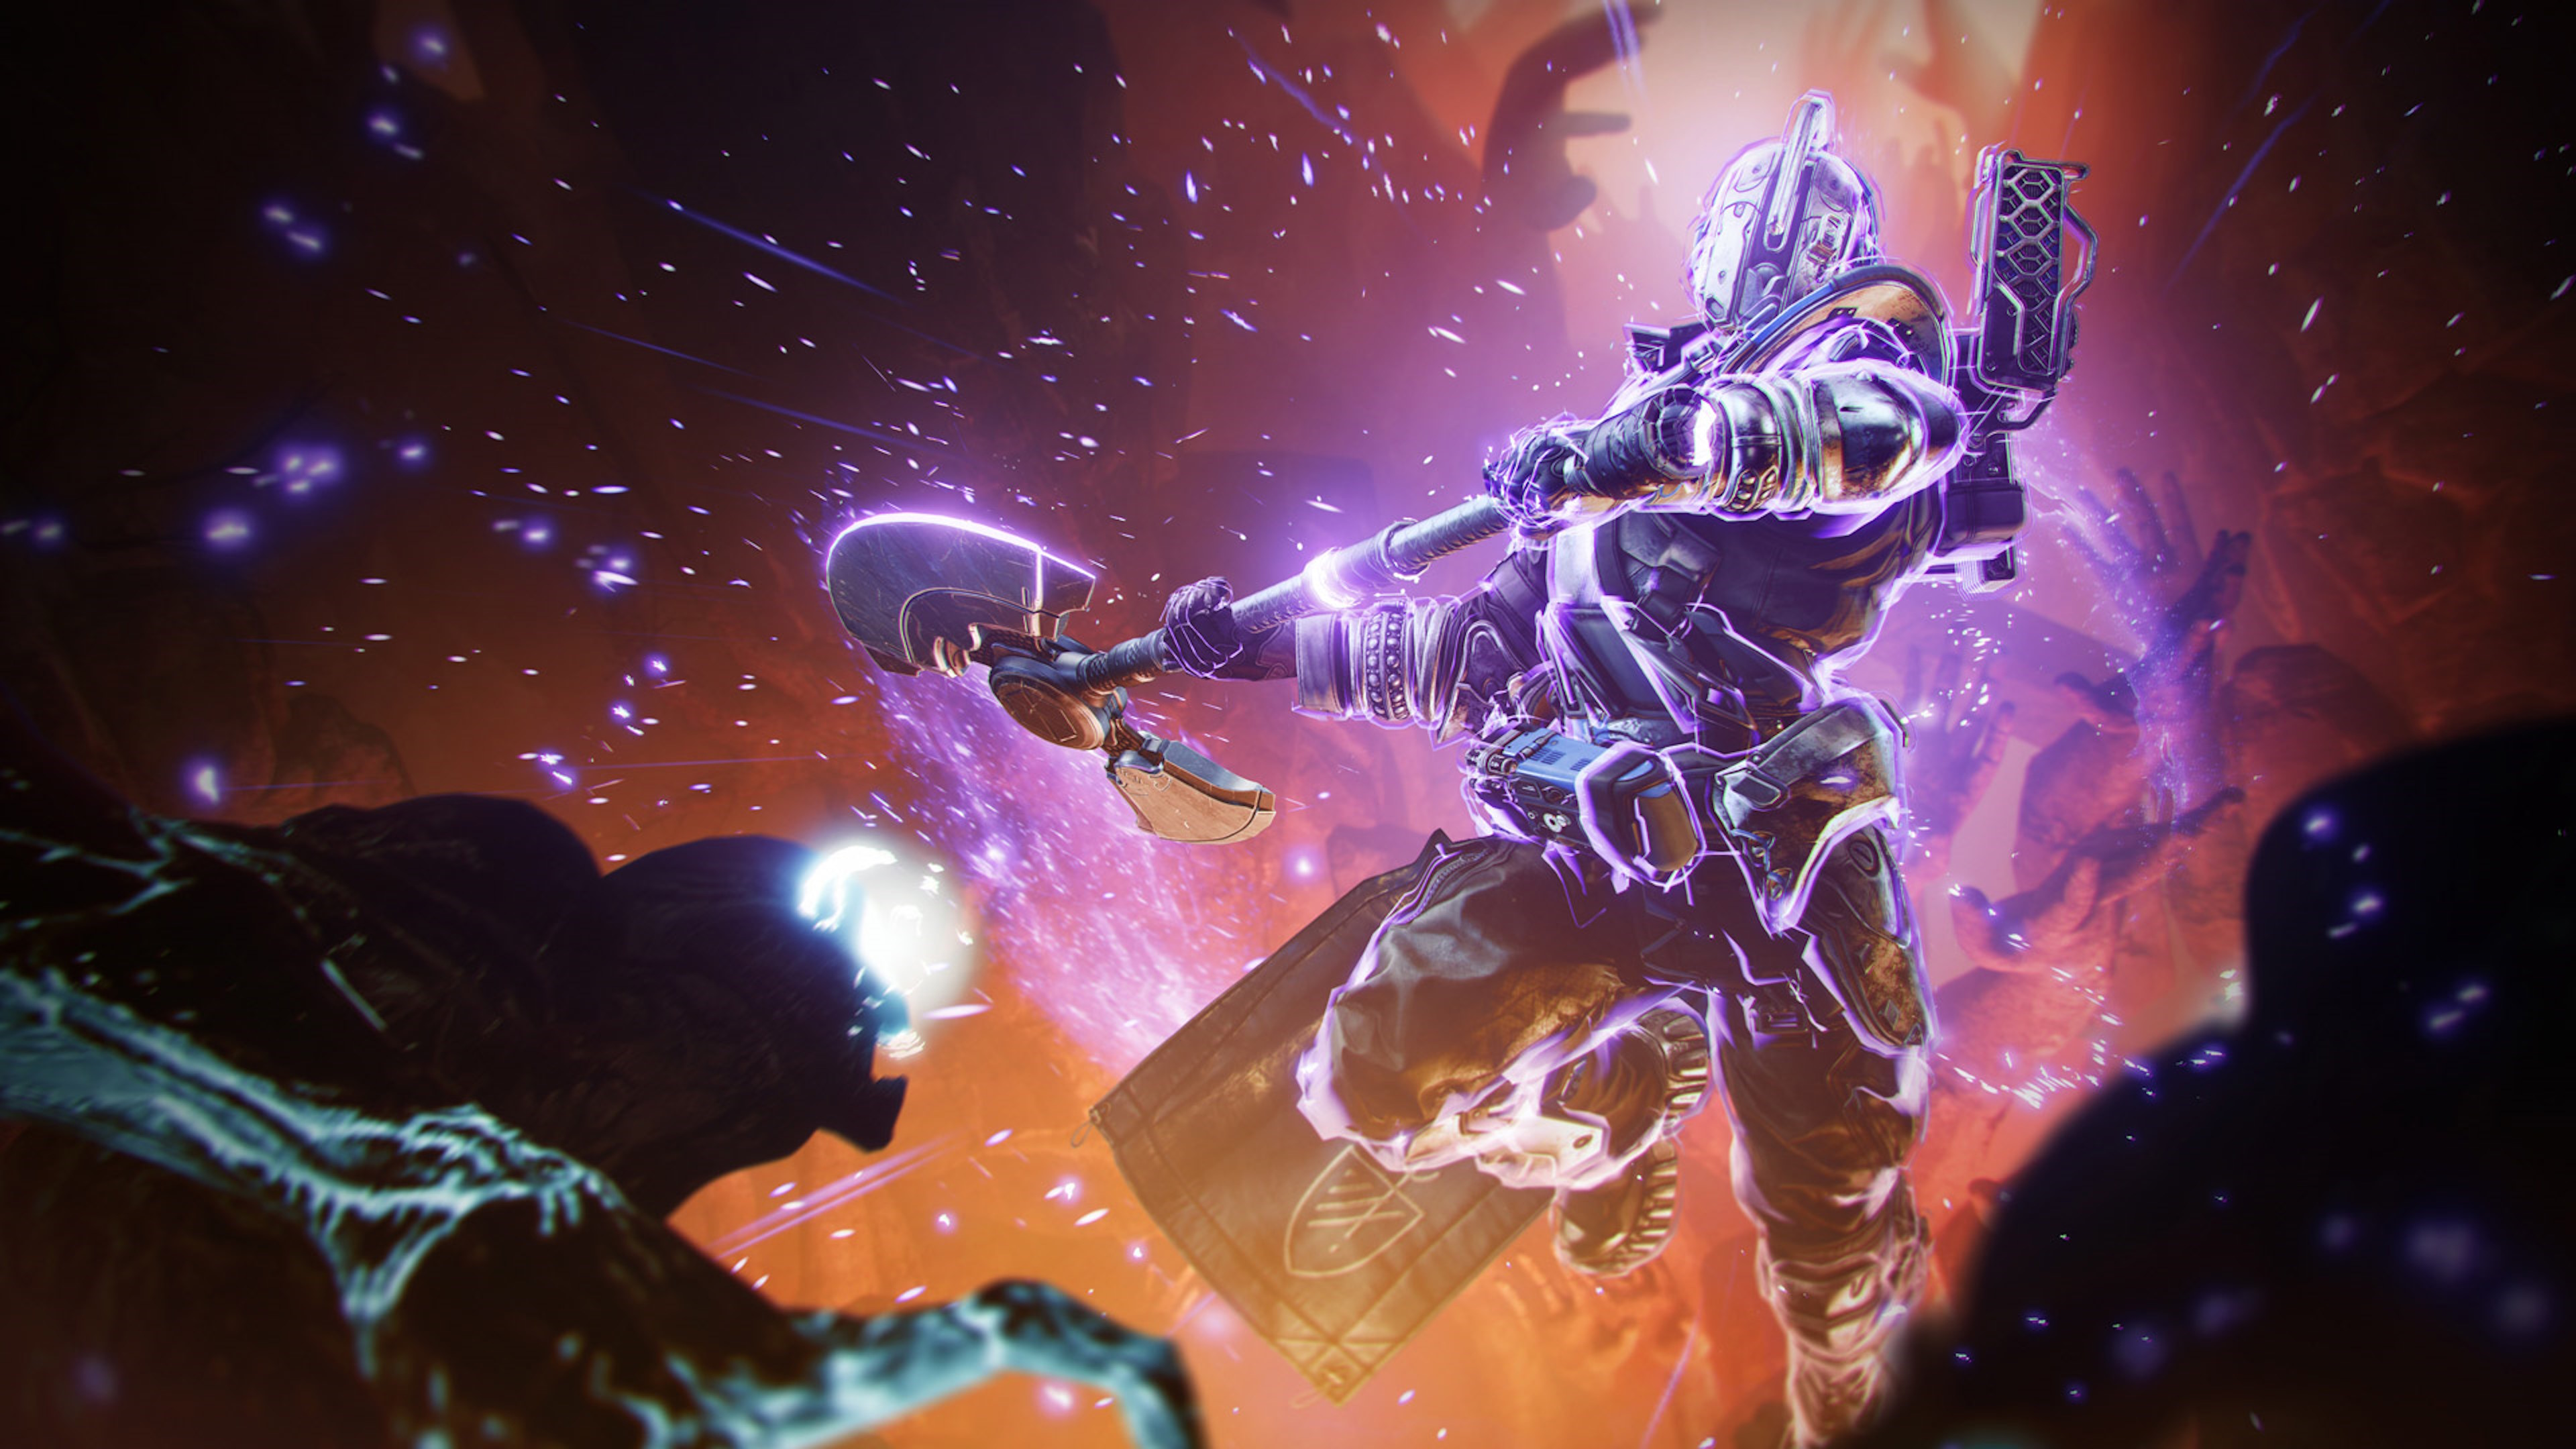  Destiny's story structure 'may have become predictable,' admits Bungie as it pivots to Episodes to 'pleasantly surprise' players more often 